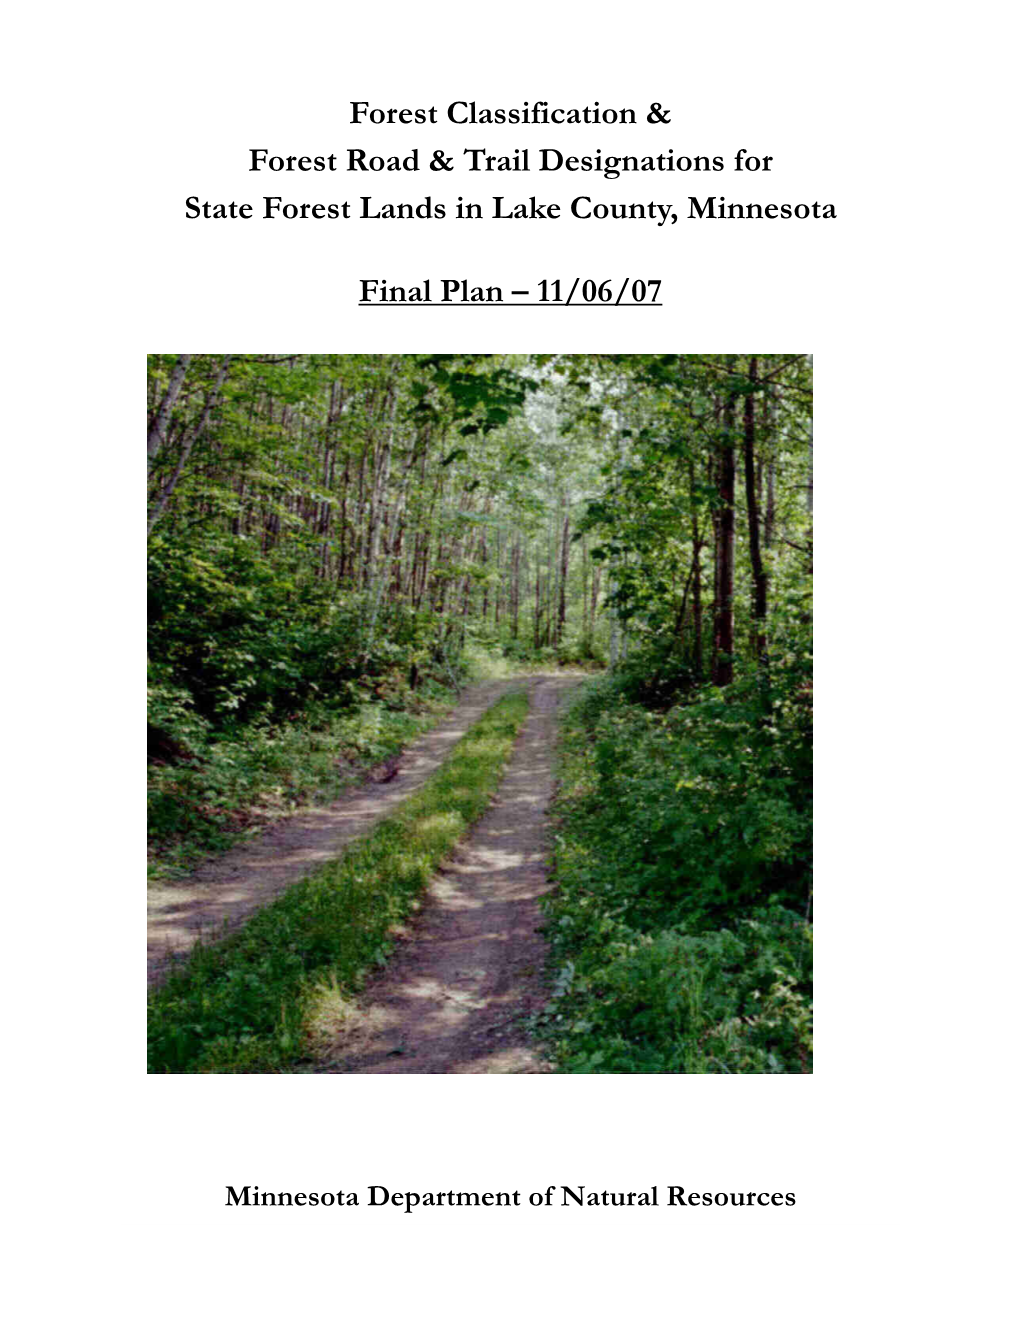 Forest Classification & Forest Road & Trail Designations for State Forest